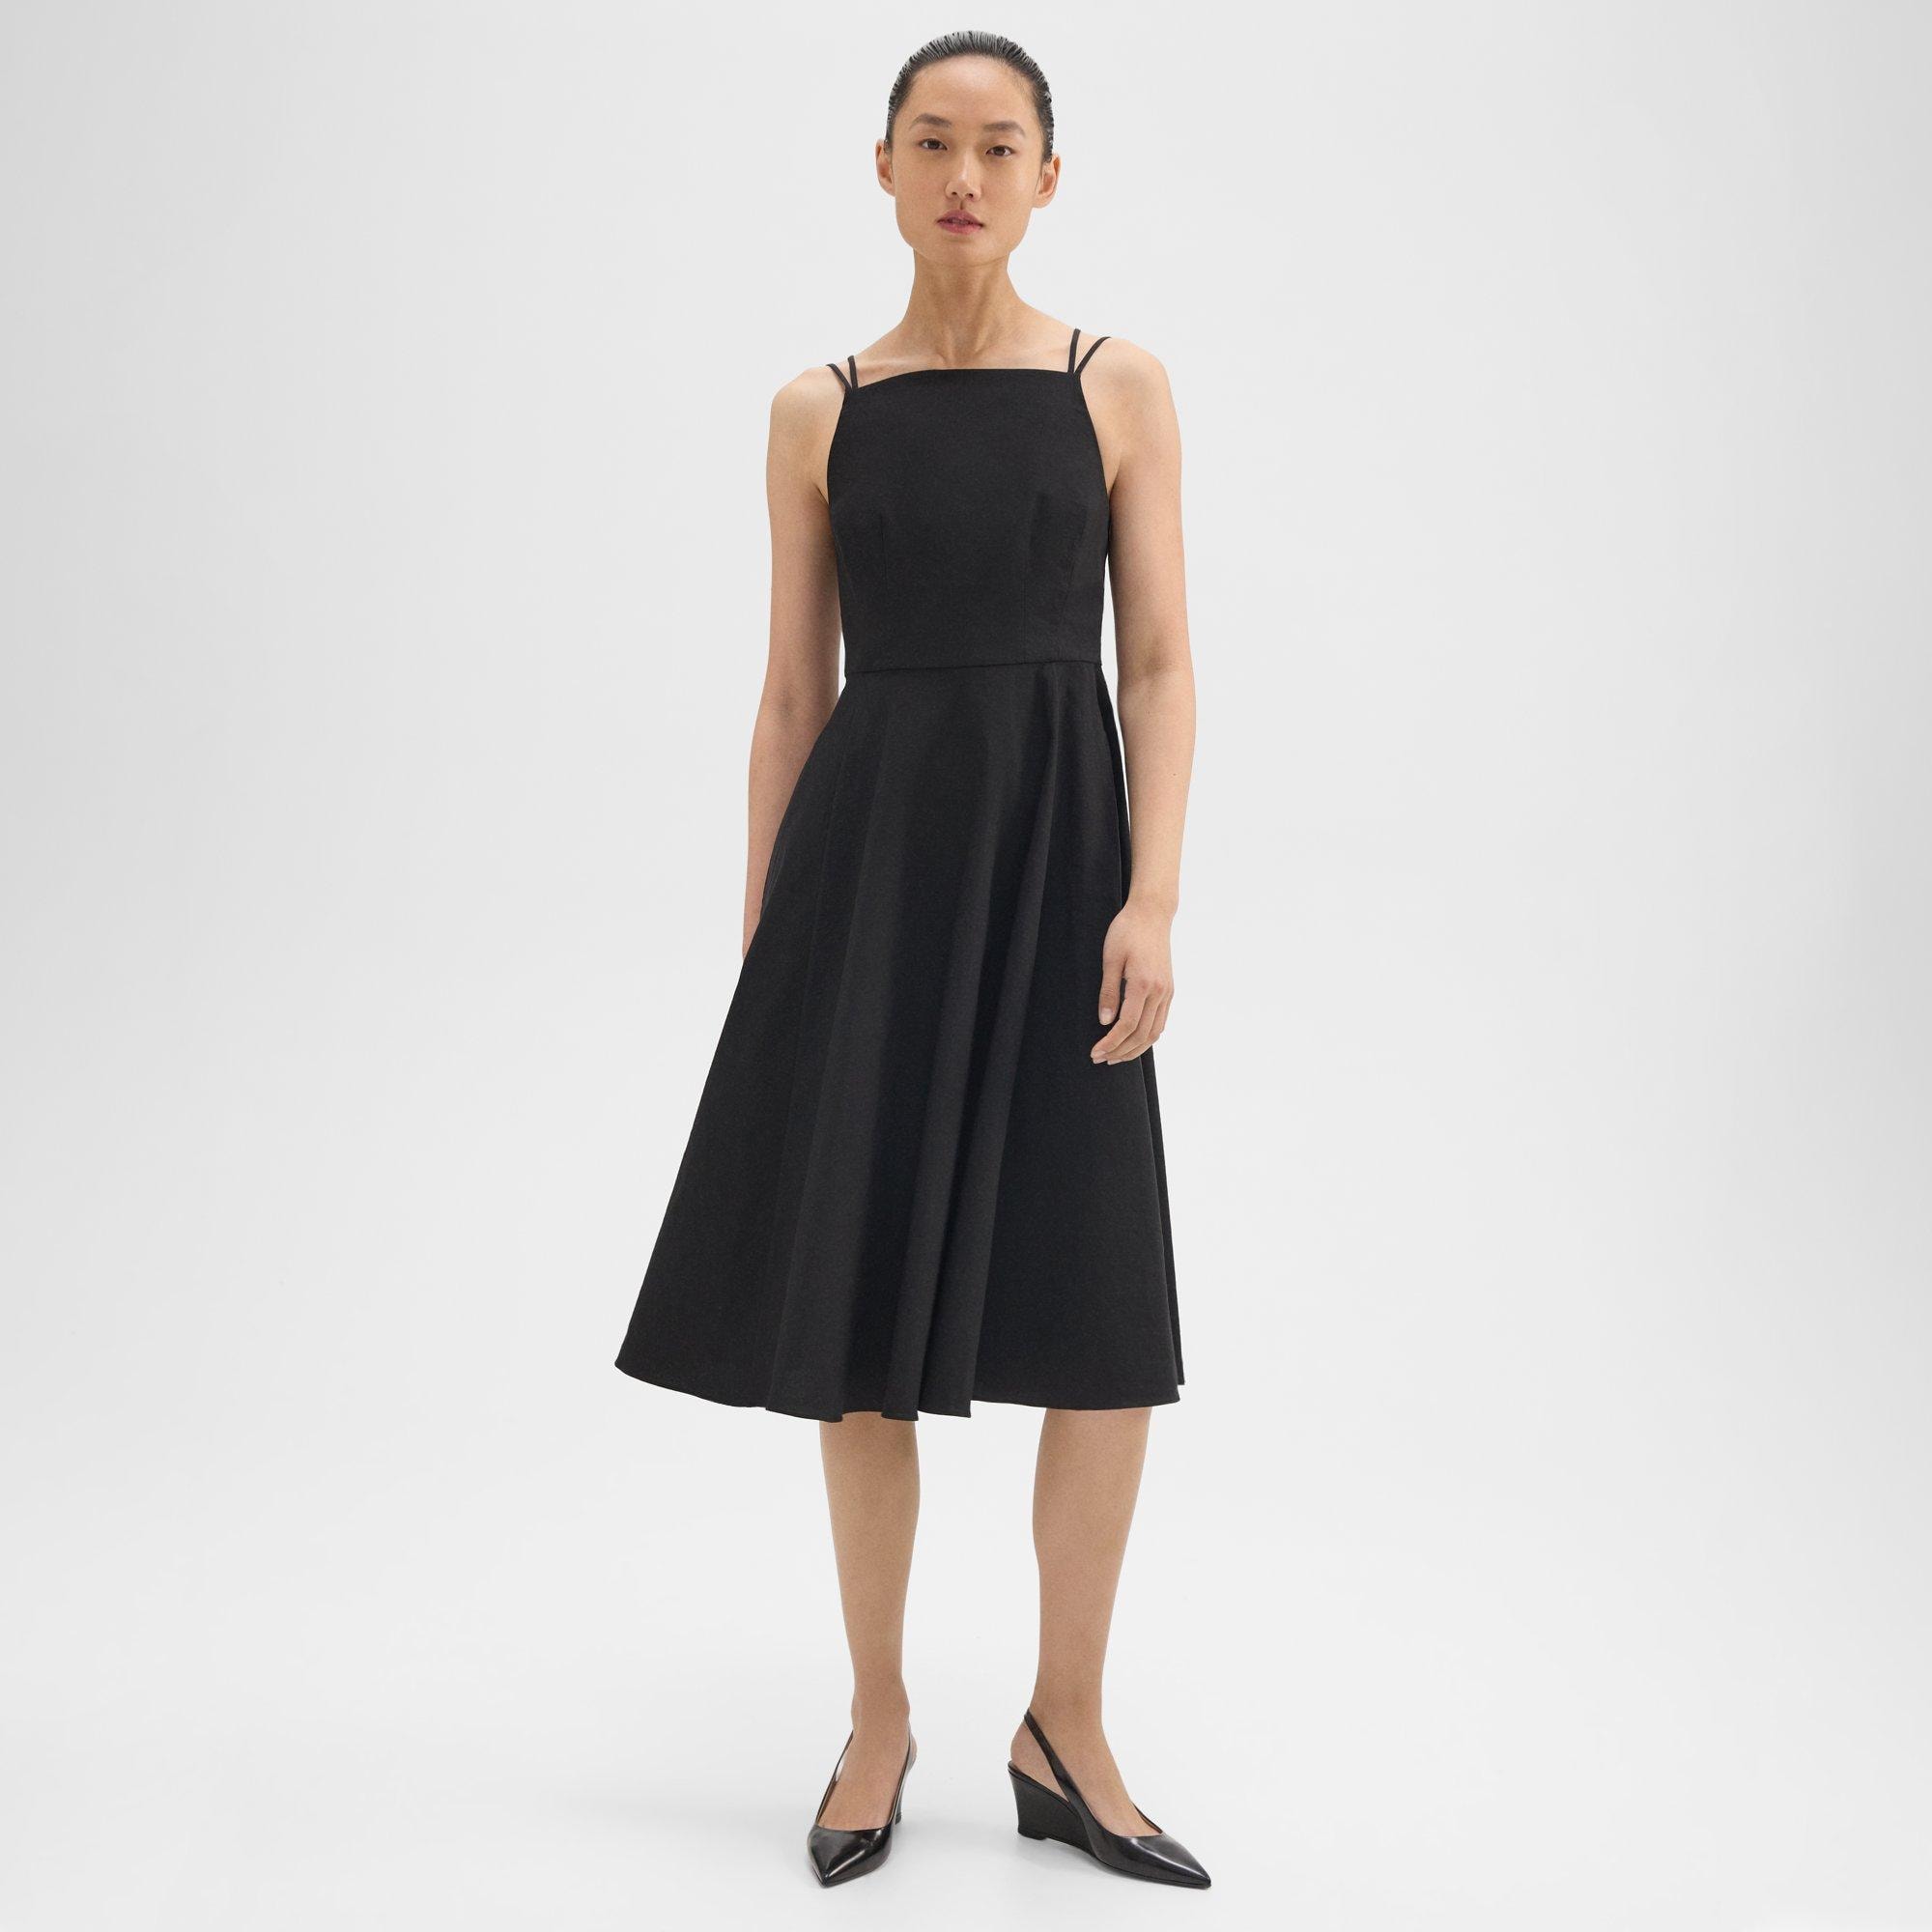 Theory Square Neck Dress in Good Linen